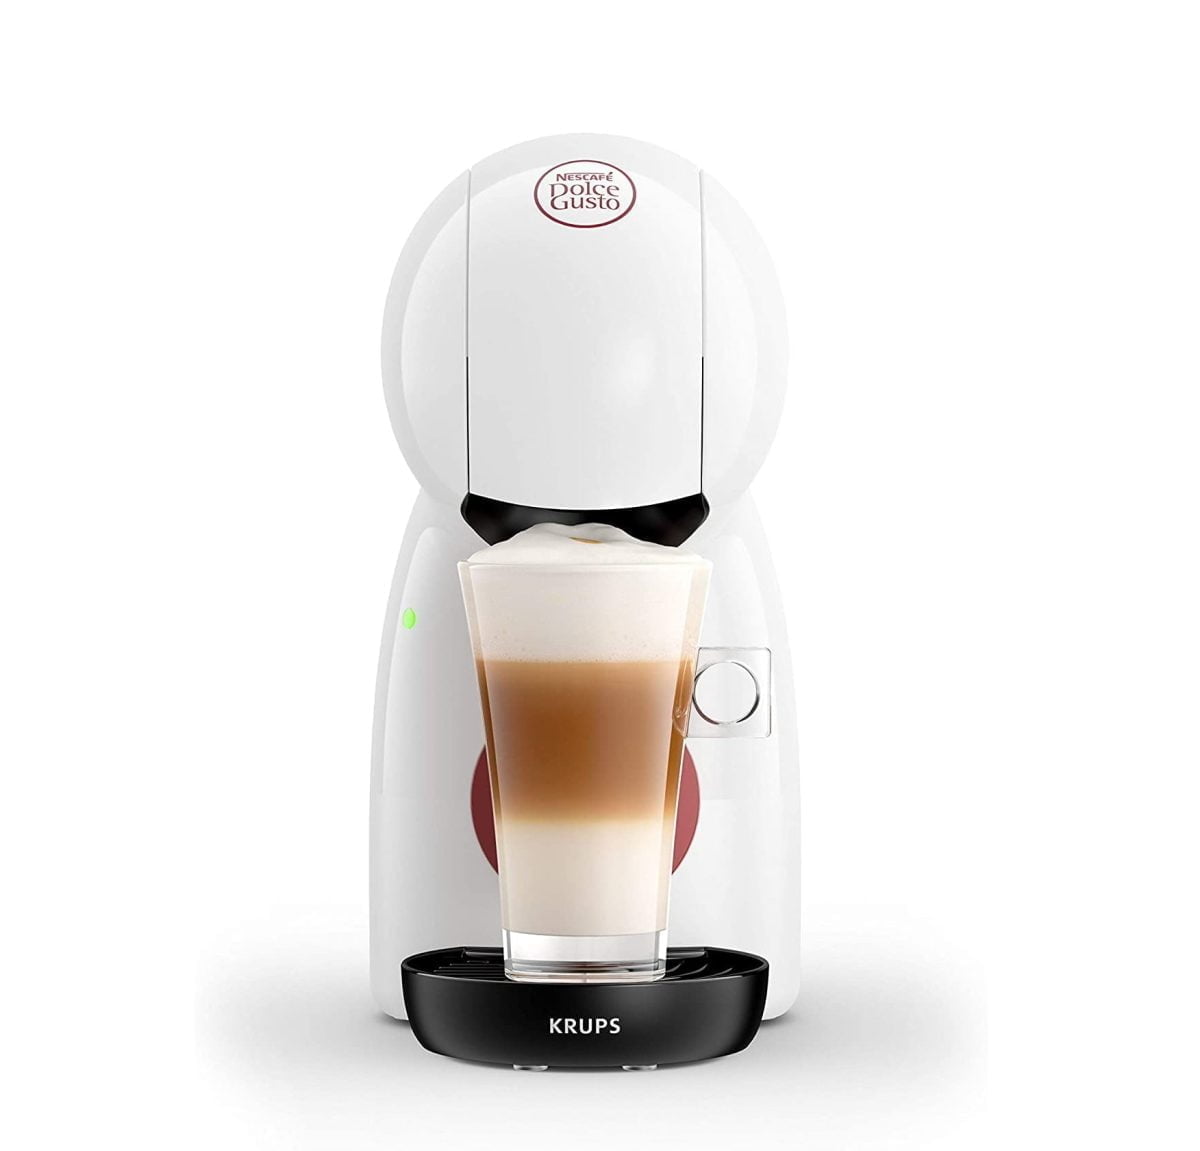 715 Nescafe &Lt;H1&Gt;Nescafé Dolce Gusto Piccolo Xs Manual Coffee Machine, Espresso, Cappuccino And More, White By Krups&Lt;/H1&Gt; &Lt;Ul&Gt; &Lt;Li&Gt;&Lt;Span Class=&Quot;A-List-Item&Quot;&Gt; Compact Design Extra Small Capsule Coffee Machine (14Cm W 28Cm H, 27Cm D) With 0. 8L Water Tank Professional Quality Coffee With A Thick Velvety Crema Thanks To Its Maximum 15 Bar Pump Pressure &Lt;/Span&Gt;&Lt;/Li&Gt; &Lt;Li&Gt;&Lt;Span Class=&Quot;A-List-Item&Quot;&Gt; Delivers Professional Quality Coffee With A Thick Velvety Crema Thanks To Its Maximum 15 Bar Pump Pressure50 Beverage Varieties Including Nescafé Dolce Gusto Or Starbucks Coffees &Lt;/Span&Gt;&Lt;/Li&Gt; &Lt;Li&Gt;&Lt;Span Class=&Quot;A-List-Item&Quot;&Gt; Over 50 Beverage Varieties Including Nescafé Dolce Gusto Or Starbucks Coffees And Cold Drink Capability For Delicious Hot And Cold Beverages Prepared With One Easy Move Of The Machines Manual Lever &Lt;/Span&Gt;&Lt;/Li&Gt; &Lt;Li&Gt;&Lt;Span Class=&Quot;A-List-Item&Quot;&Gt; Hot And Cold Drink Capability For Delicious Hot And Cold Beverages Prepared With One Easy Move Of The Machines Manual Lever Easy To Buy Capsules: Available In All Supermarkets And Full Range On The Nescafe Dolce Gusto Webshop. Easy To Buy Capsules: Available In All Supermarkets And Full Range On The Nescafe Dolce Gusto Webshop &Lt;/Span&Gt;&Lt;/Li&Gt; &Lt;/Ul&Gt; Coffee Machine Nescafé Dolce Gusto Piccolo Xs Manual Coffee Machine, Espresso, Cappuccino And More, White By Krups